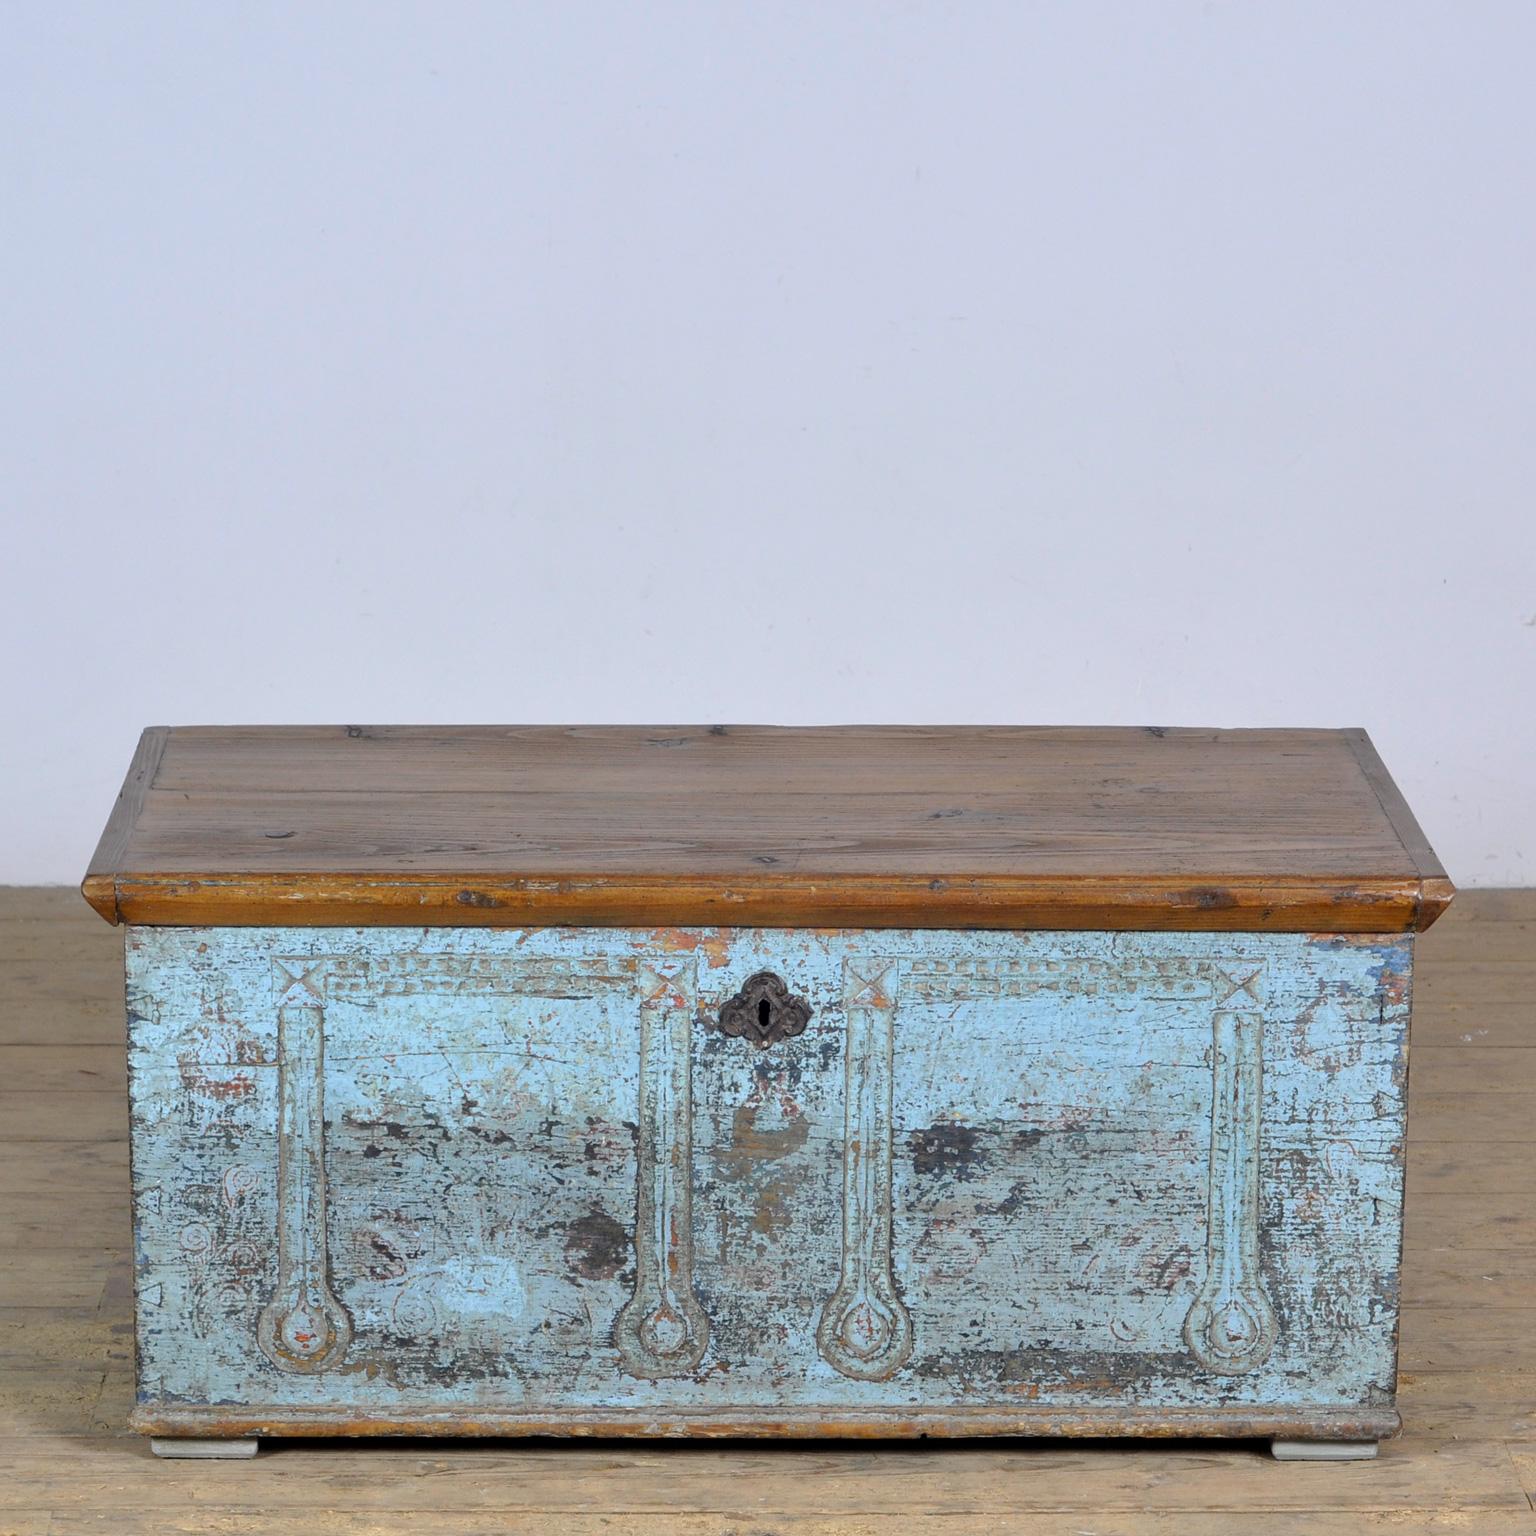 A painted pine wedding chest from Hungary with the original blue paint, circa 1880. Clean on the inside. Neat coffee table, collector's item or storage unit.